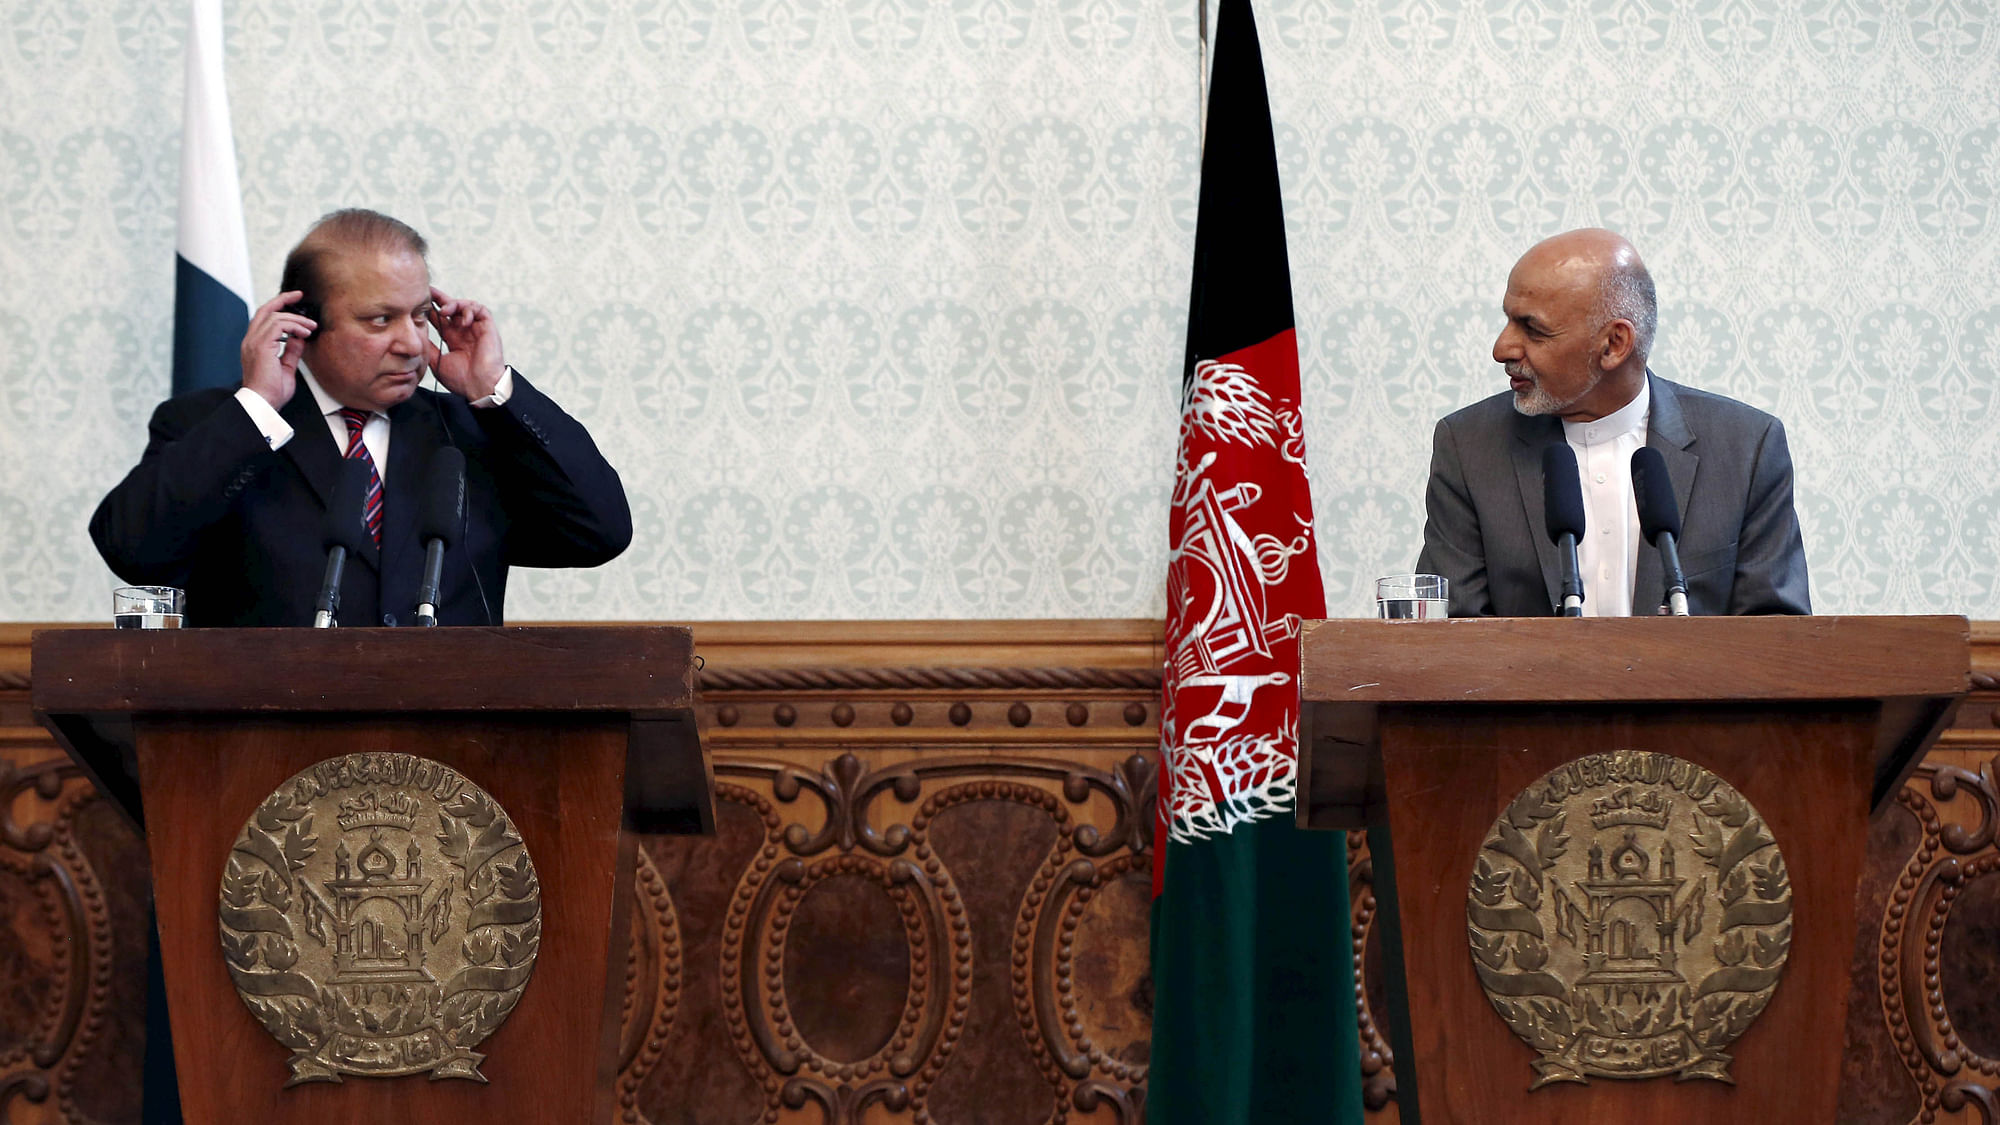 Afghan President Ashraf Ghani (R) speaks as Pakistani Prime Minister Nawaz Sharif looks on during a news conference in Kabul. (Photo: Reuters)